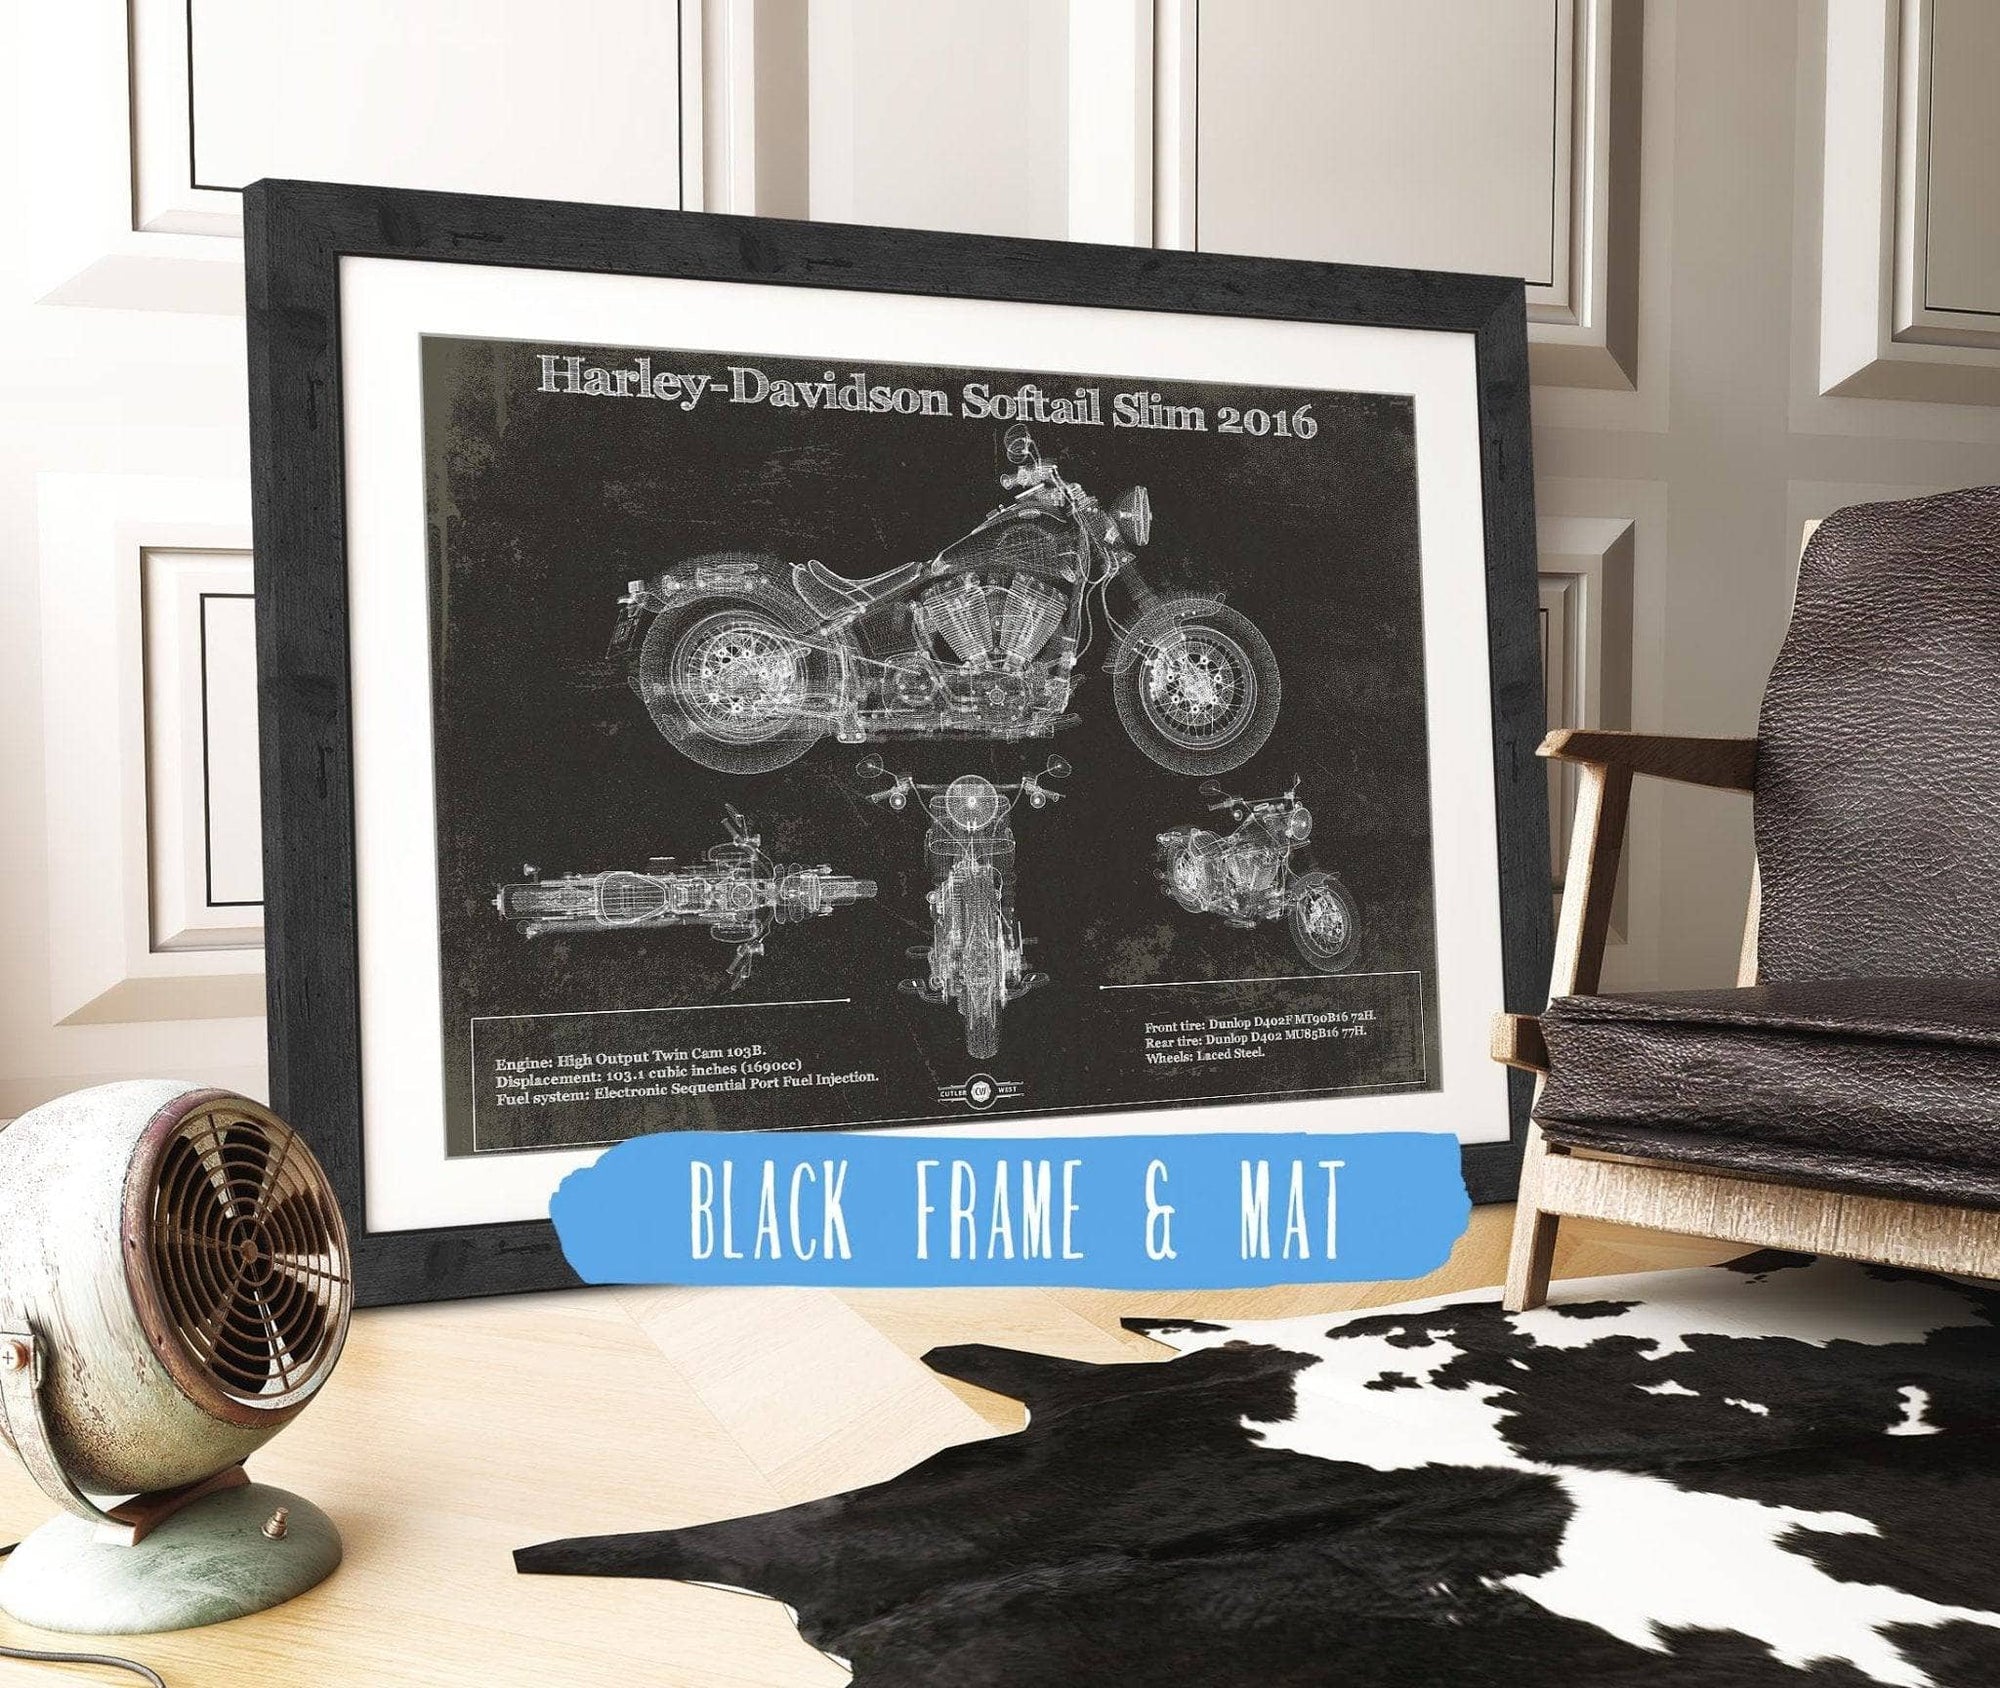 Cutler West Best Selling Collection 14" x 11" / Black Frame & Mat Harley Davidson Softail Slim S Army Design 2016 Motorcycle Patent Print 845000197_64314